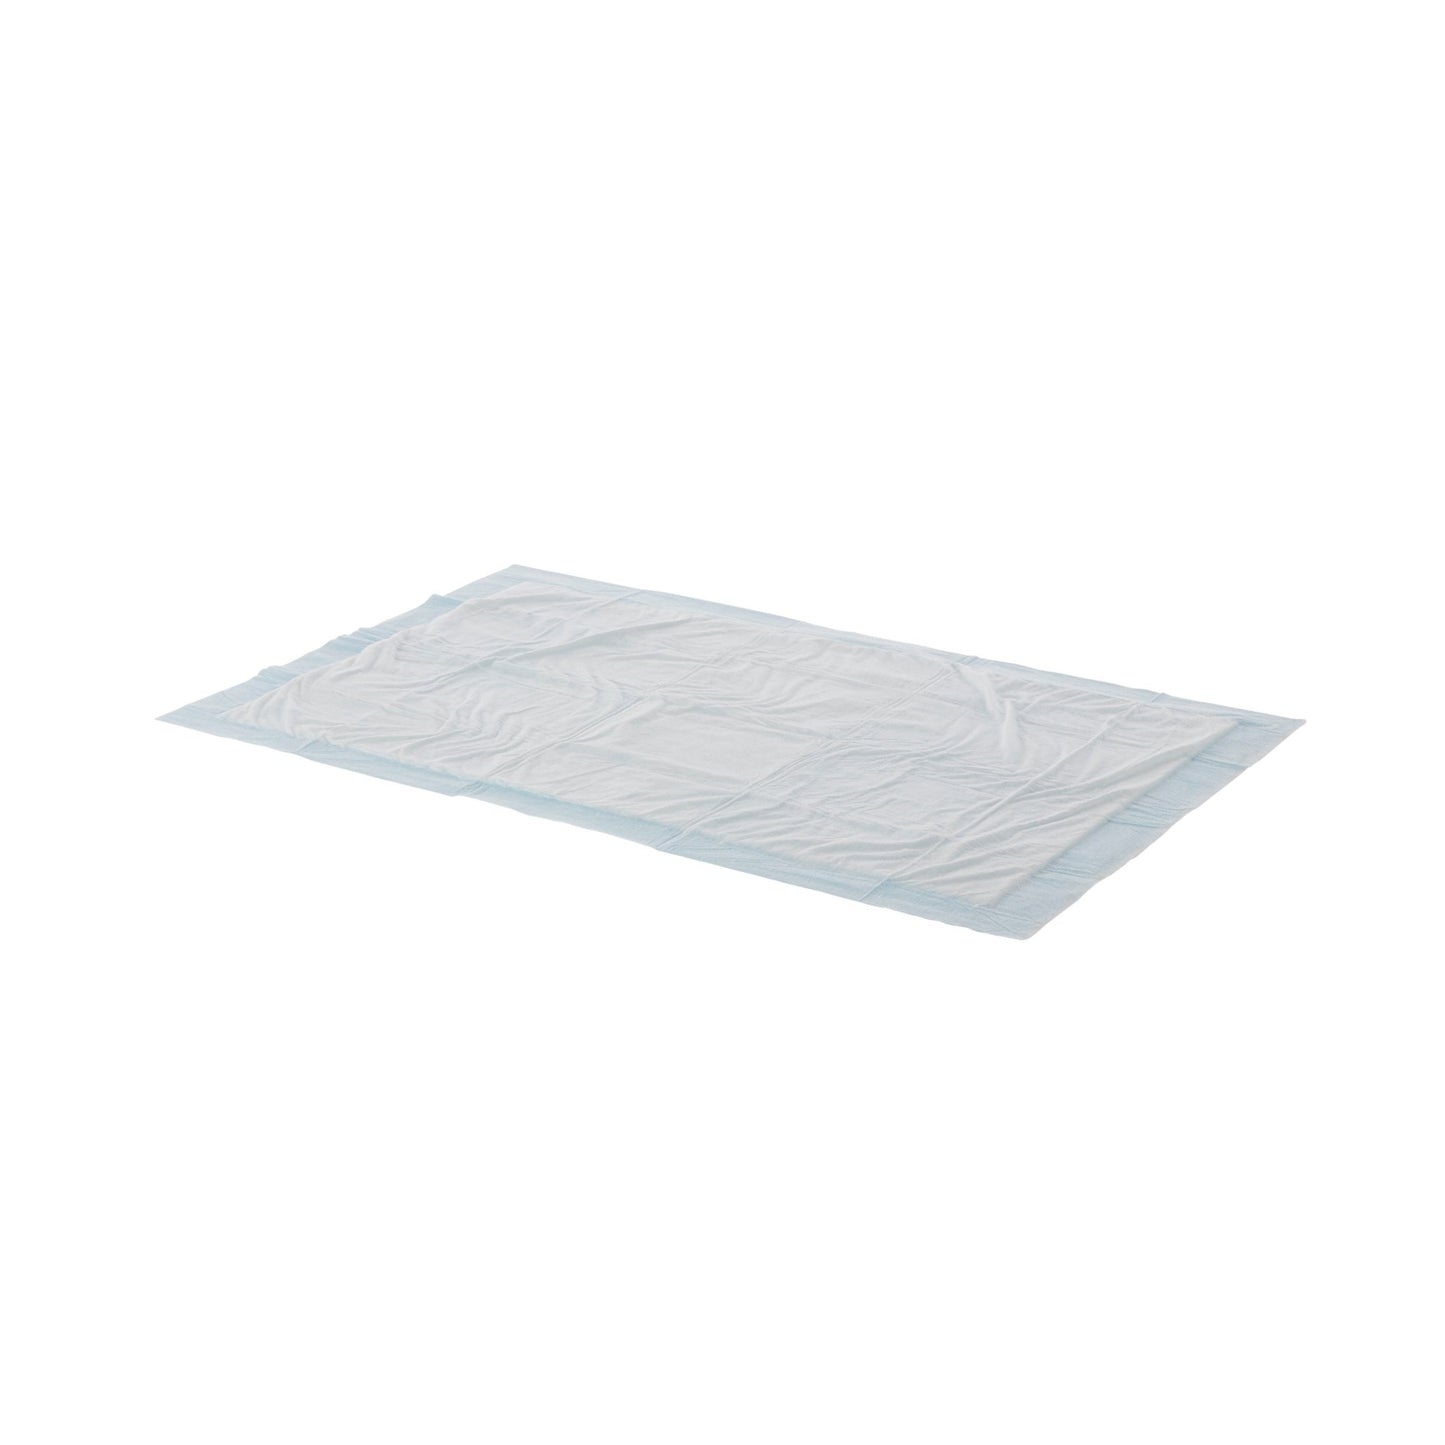 ProCare Incontinence Fluff Underpads